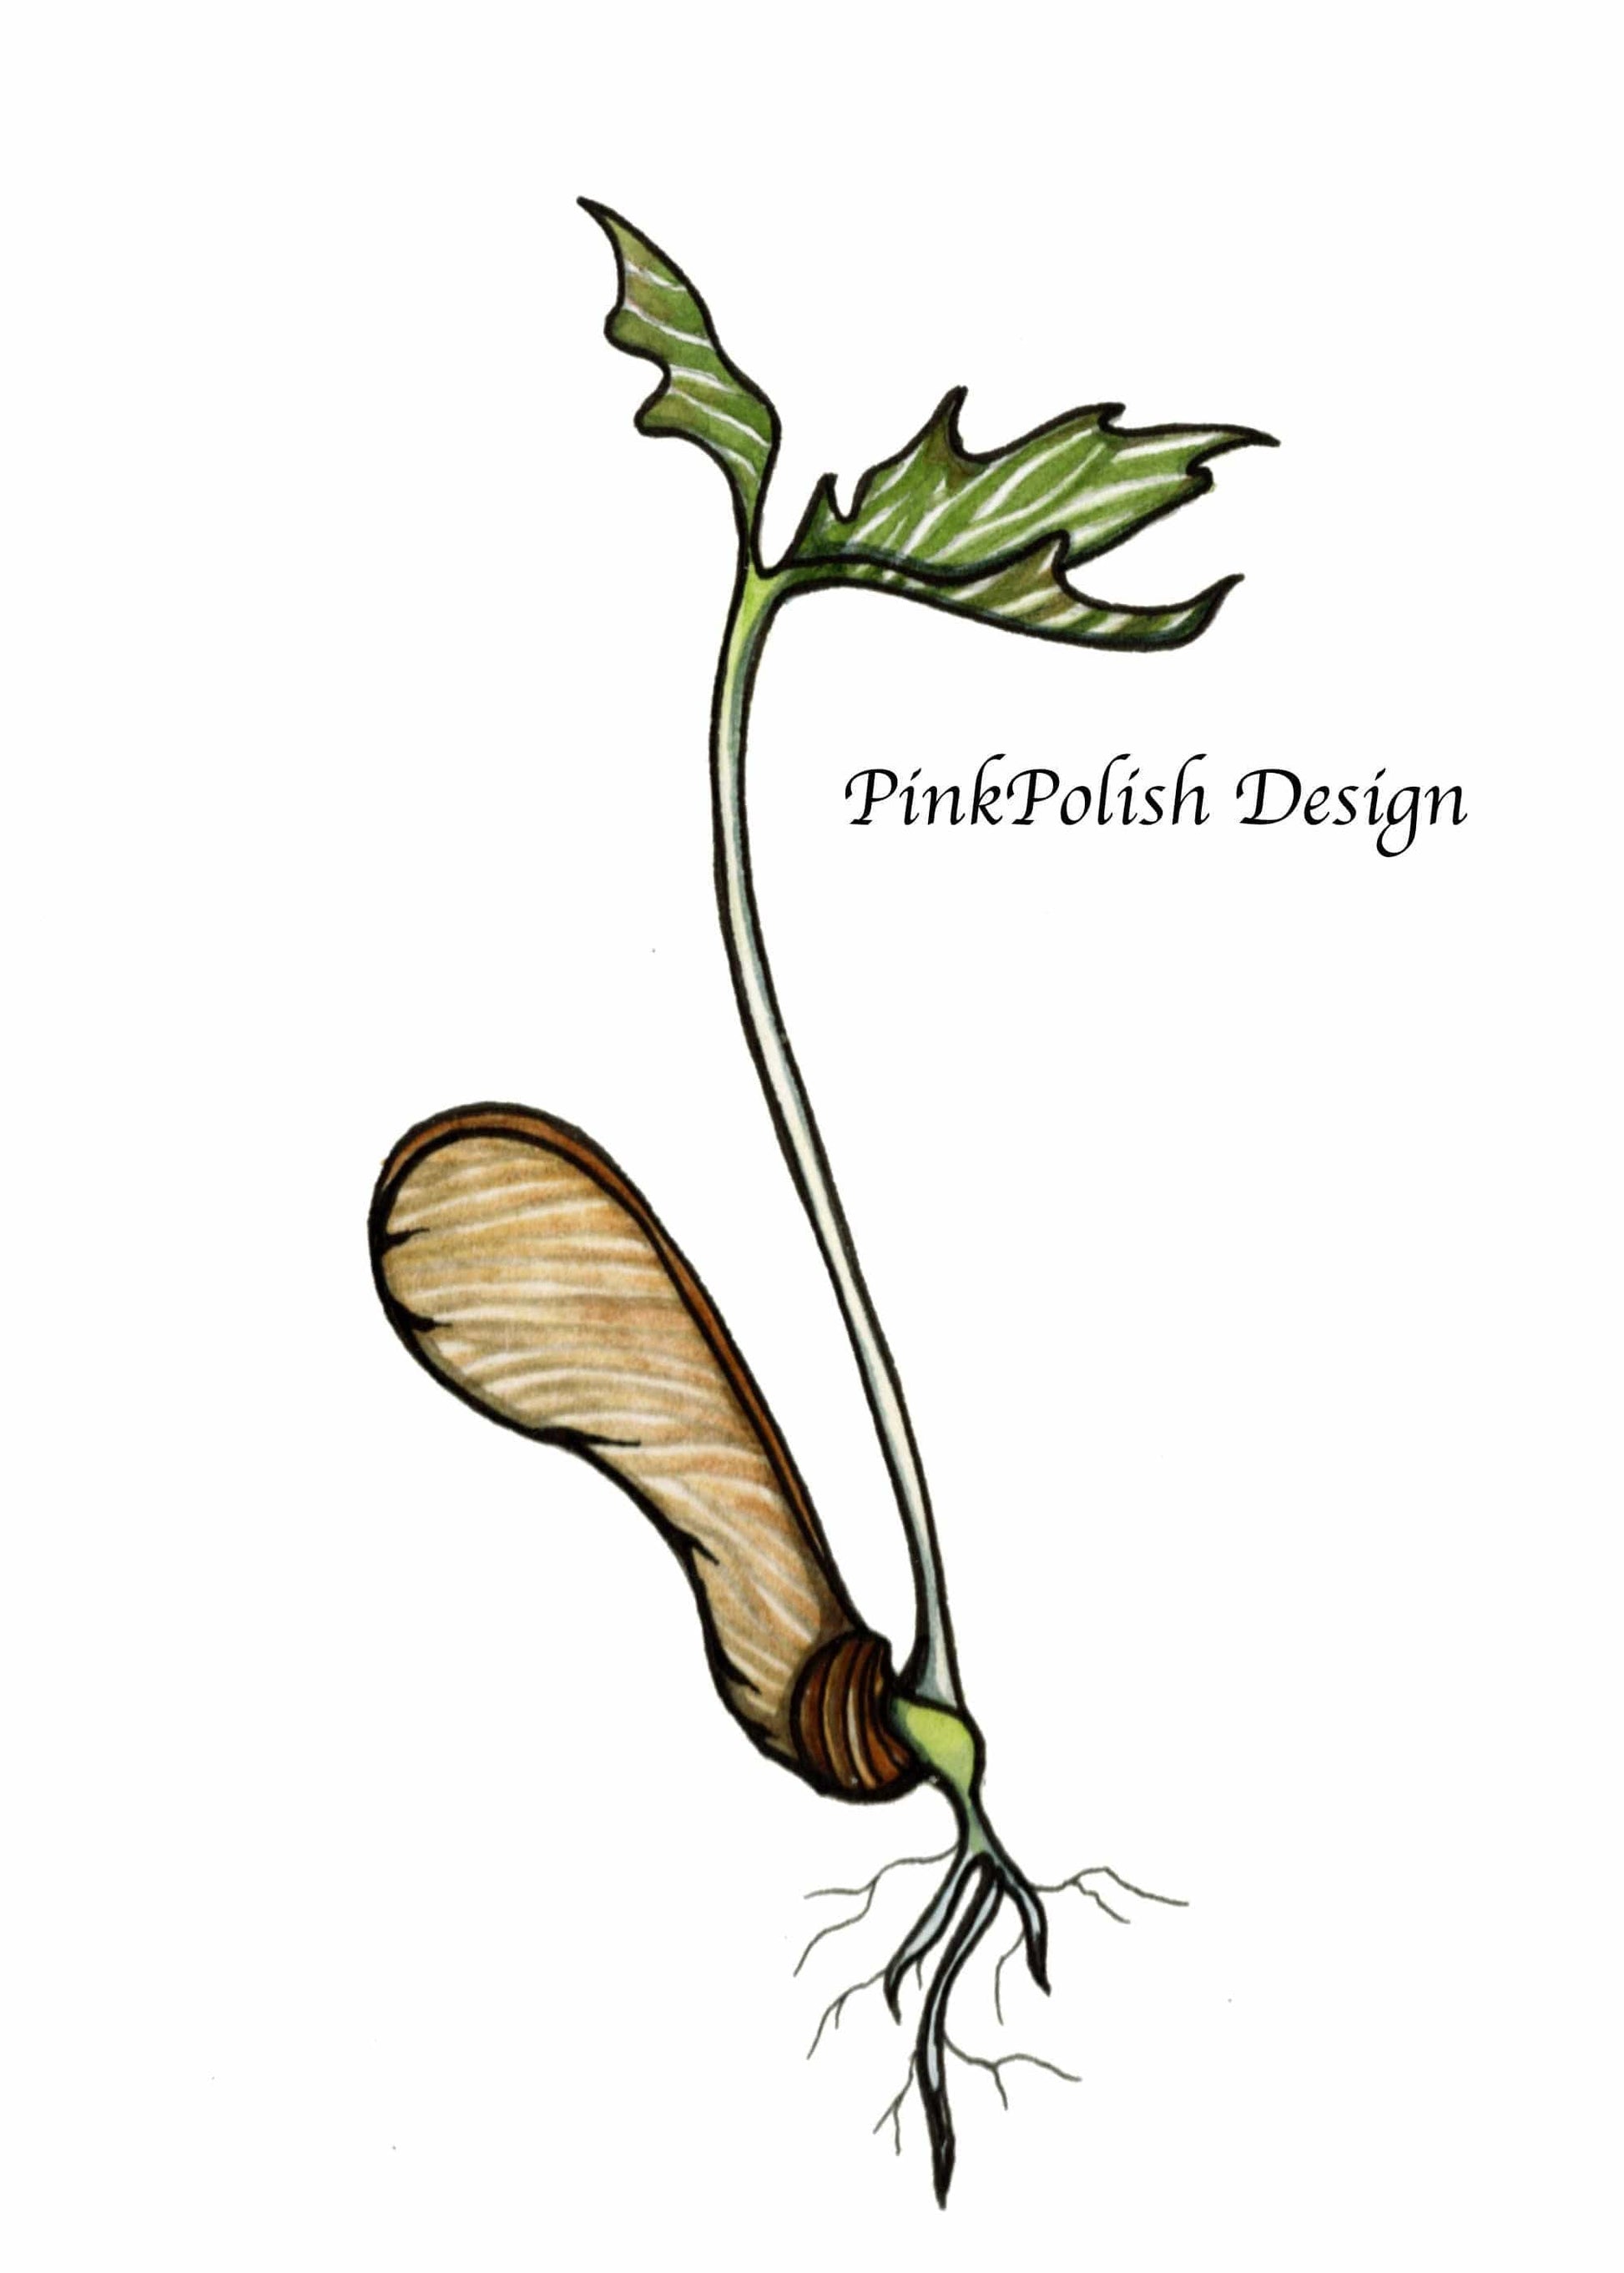 PinkPolish Design Art Prints "Maple Seed Sprout" Watercolor Painting: Art Print